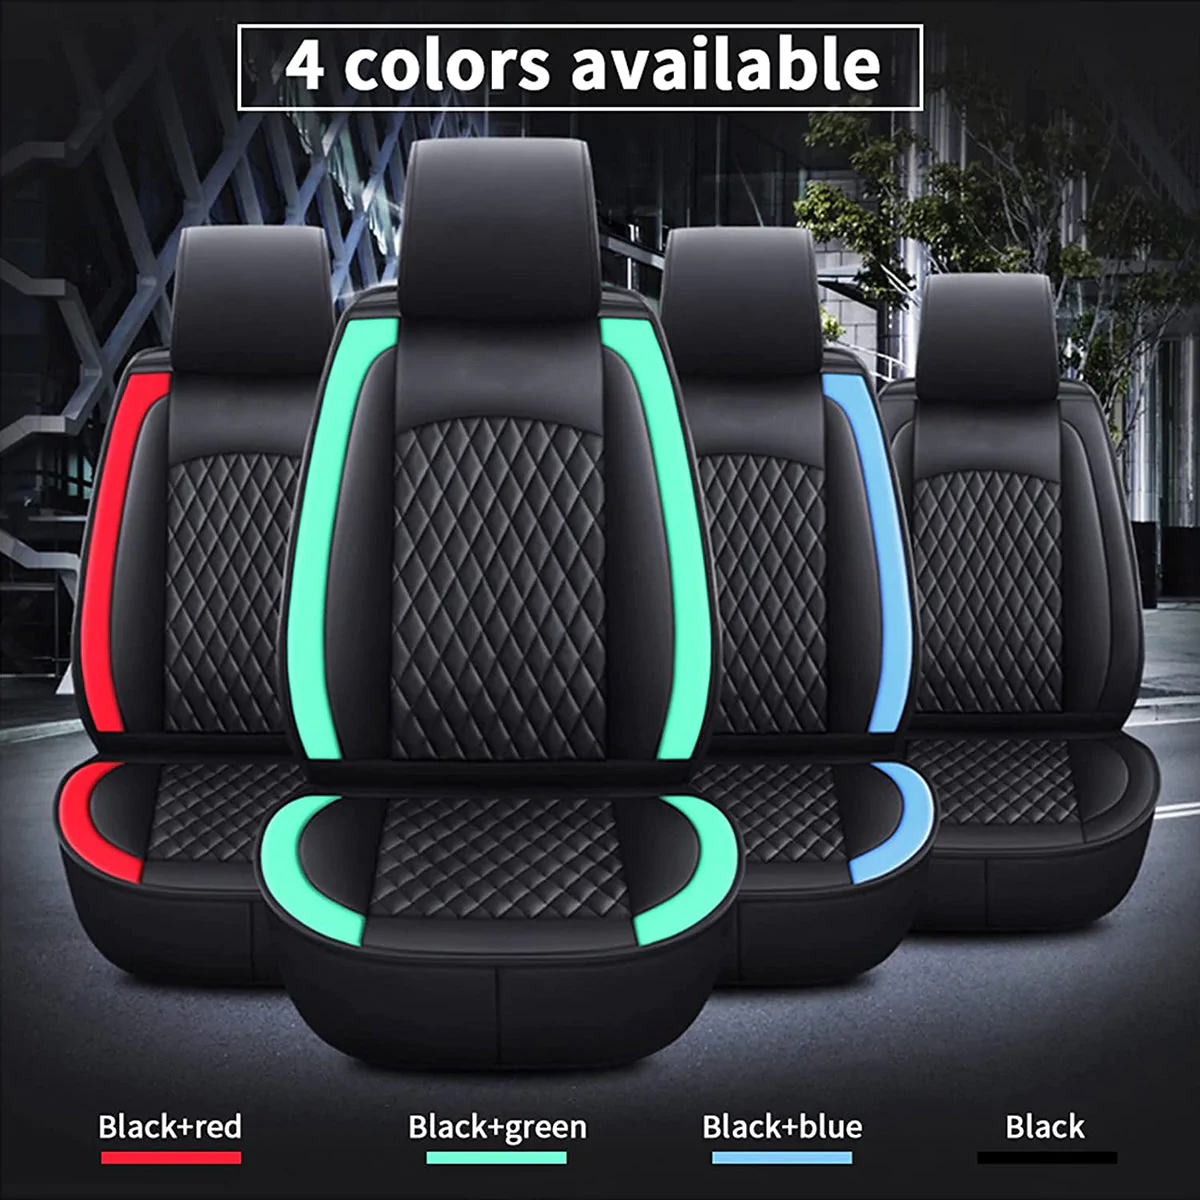 Custom Text For Seat Covers 5 Seats Full Set, Custom Fit For Your Cars, Leatherette Automotive Seat Cushion Protector Universal Fit, Vehicle Auto Interior Decor NS13988